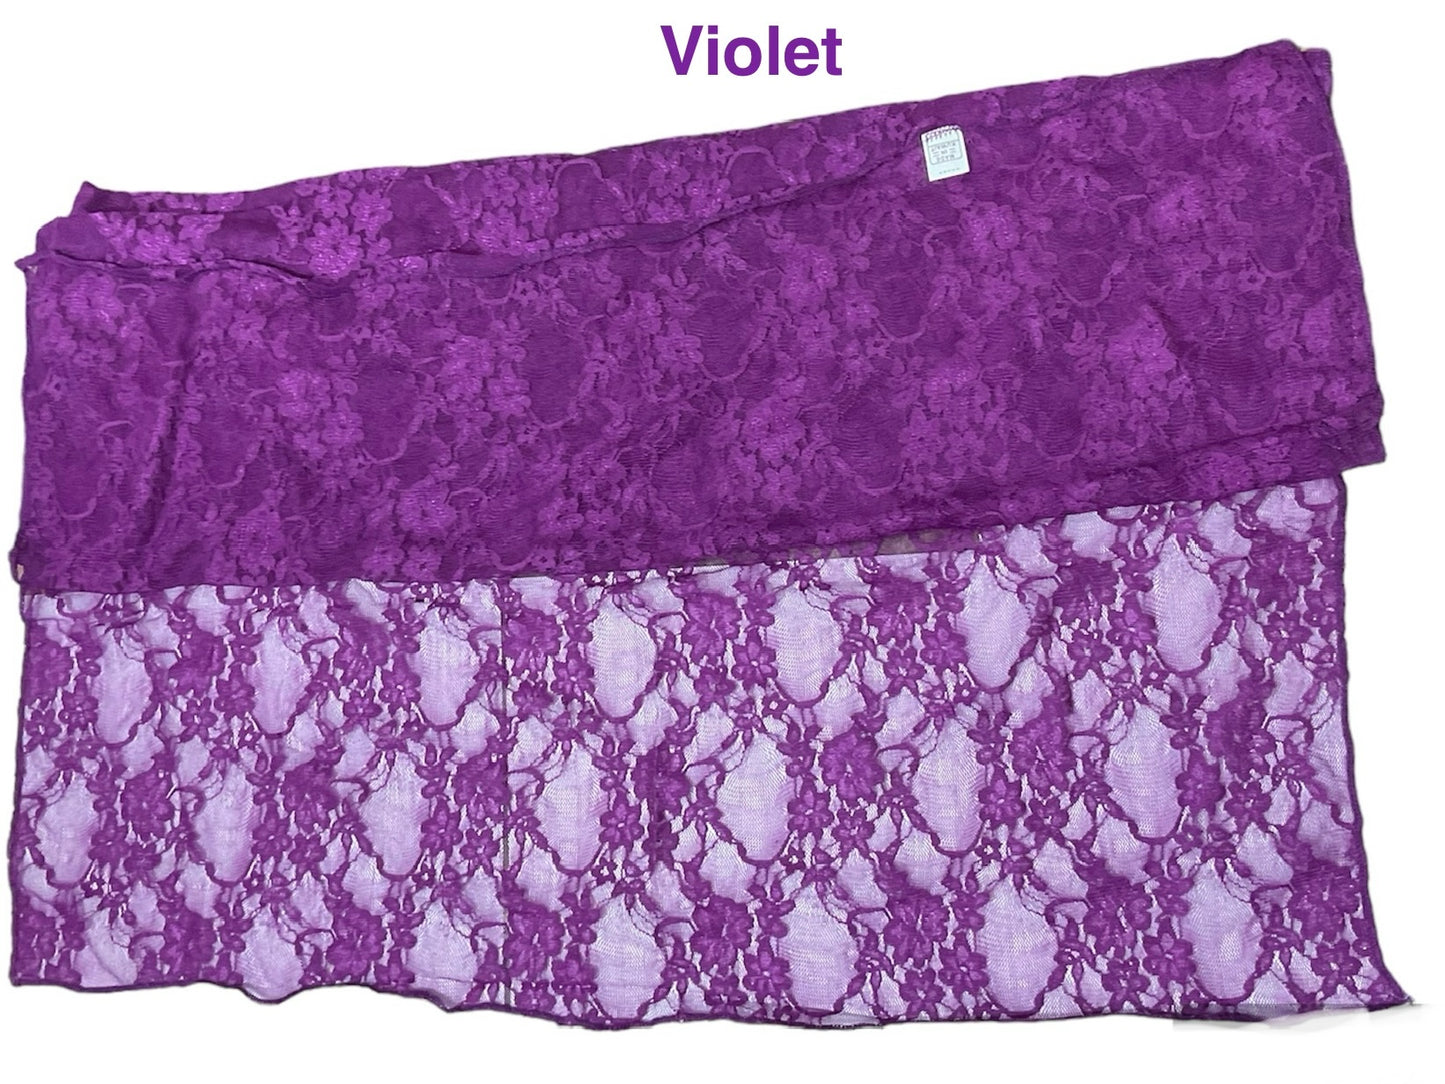 Very elegent stretch lace Shawls made in Kuwait